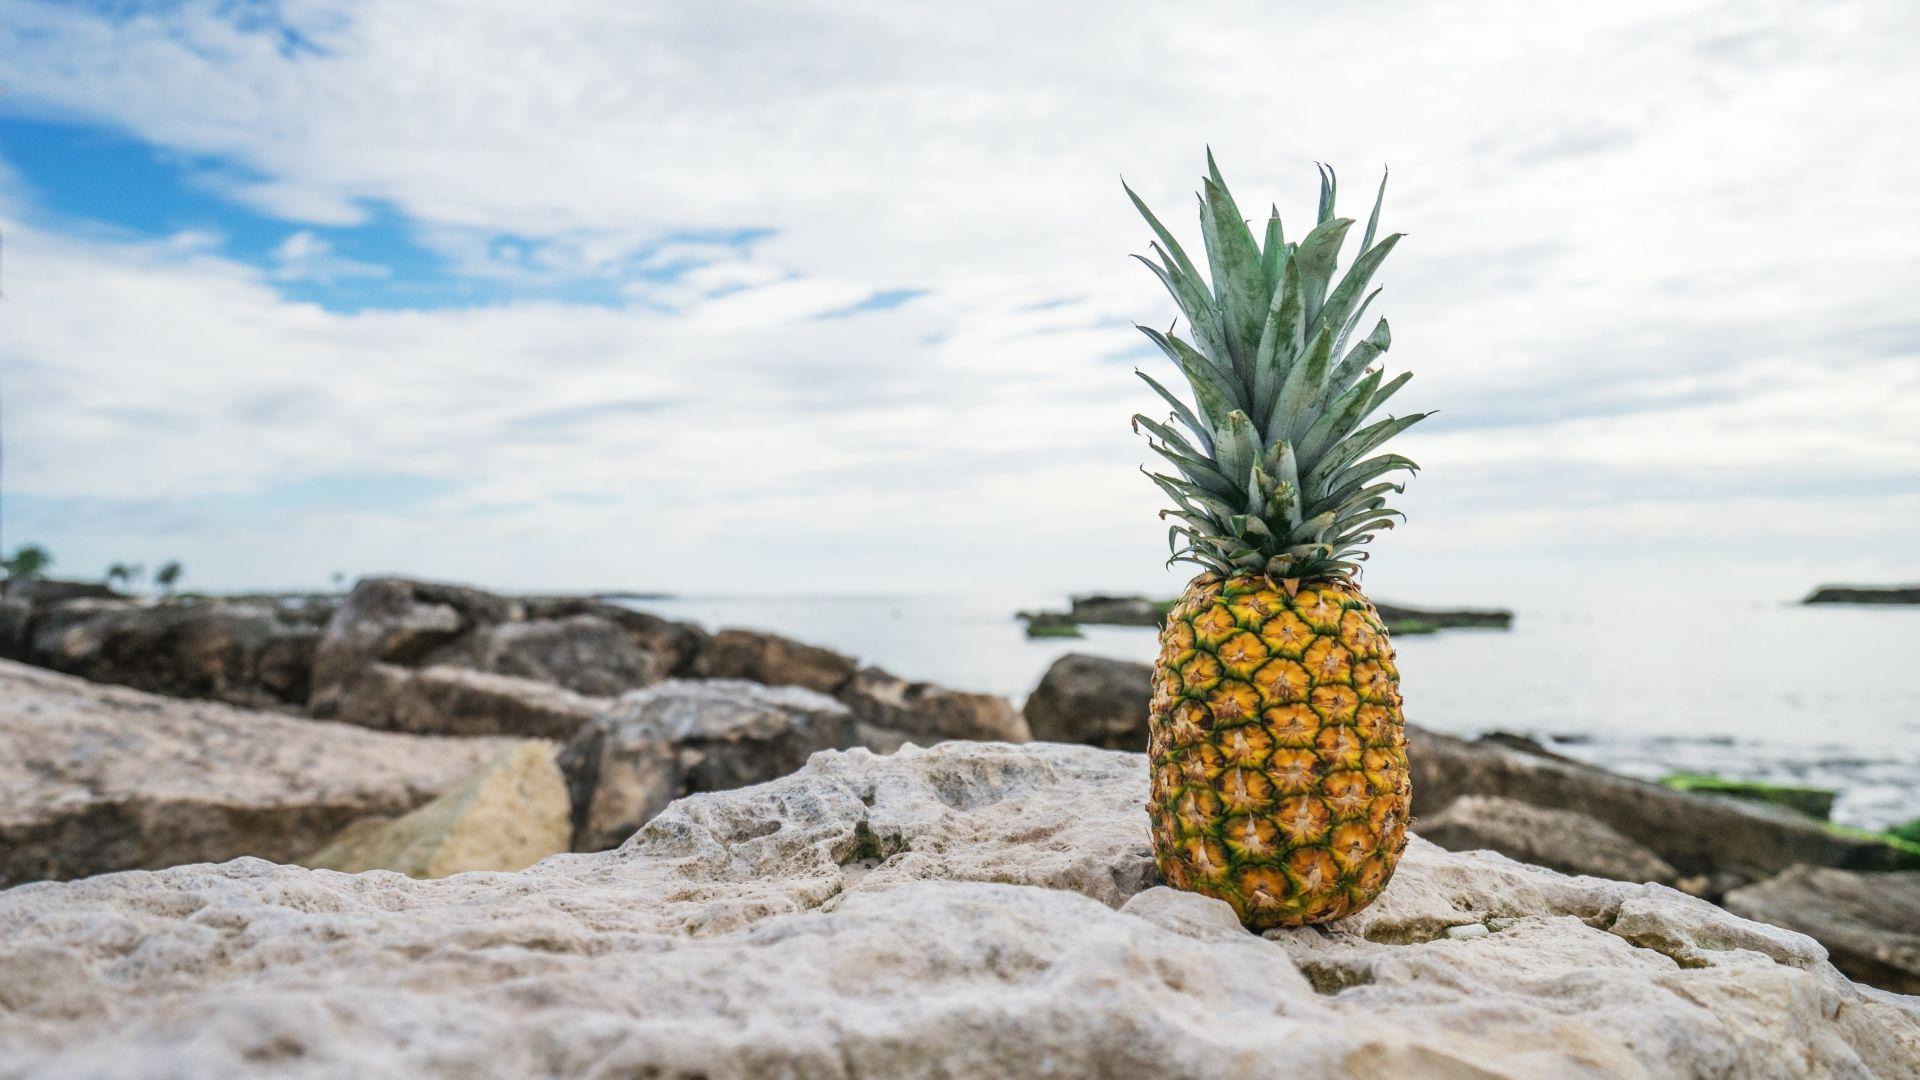 Pineapple Photography HD Wallpaper 61704 1920x1080 px